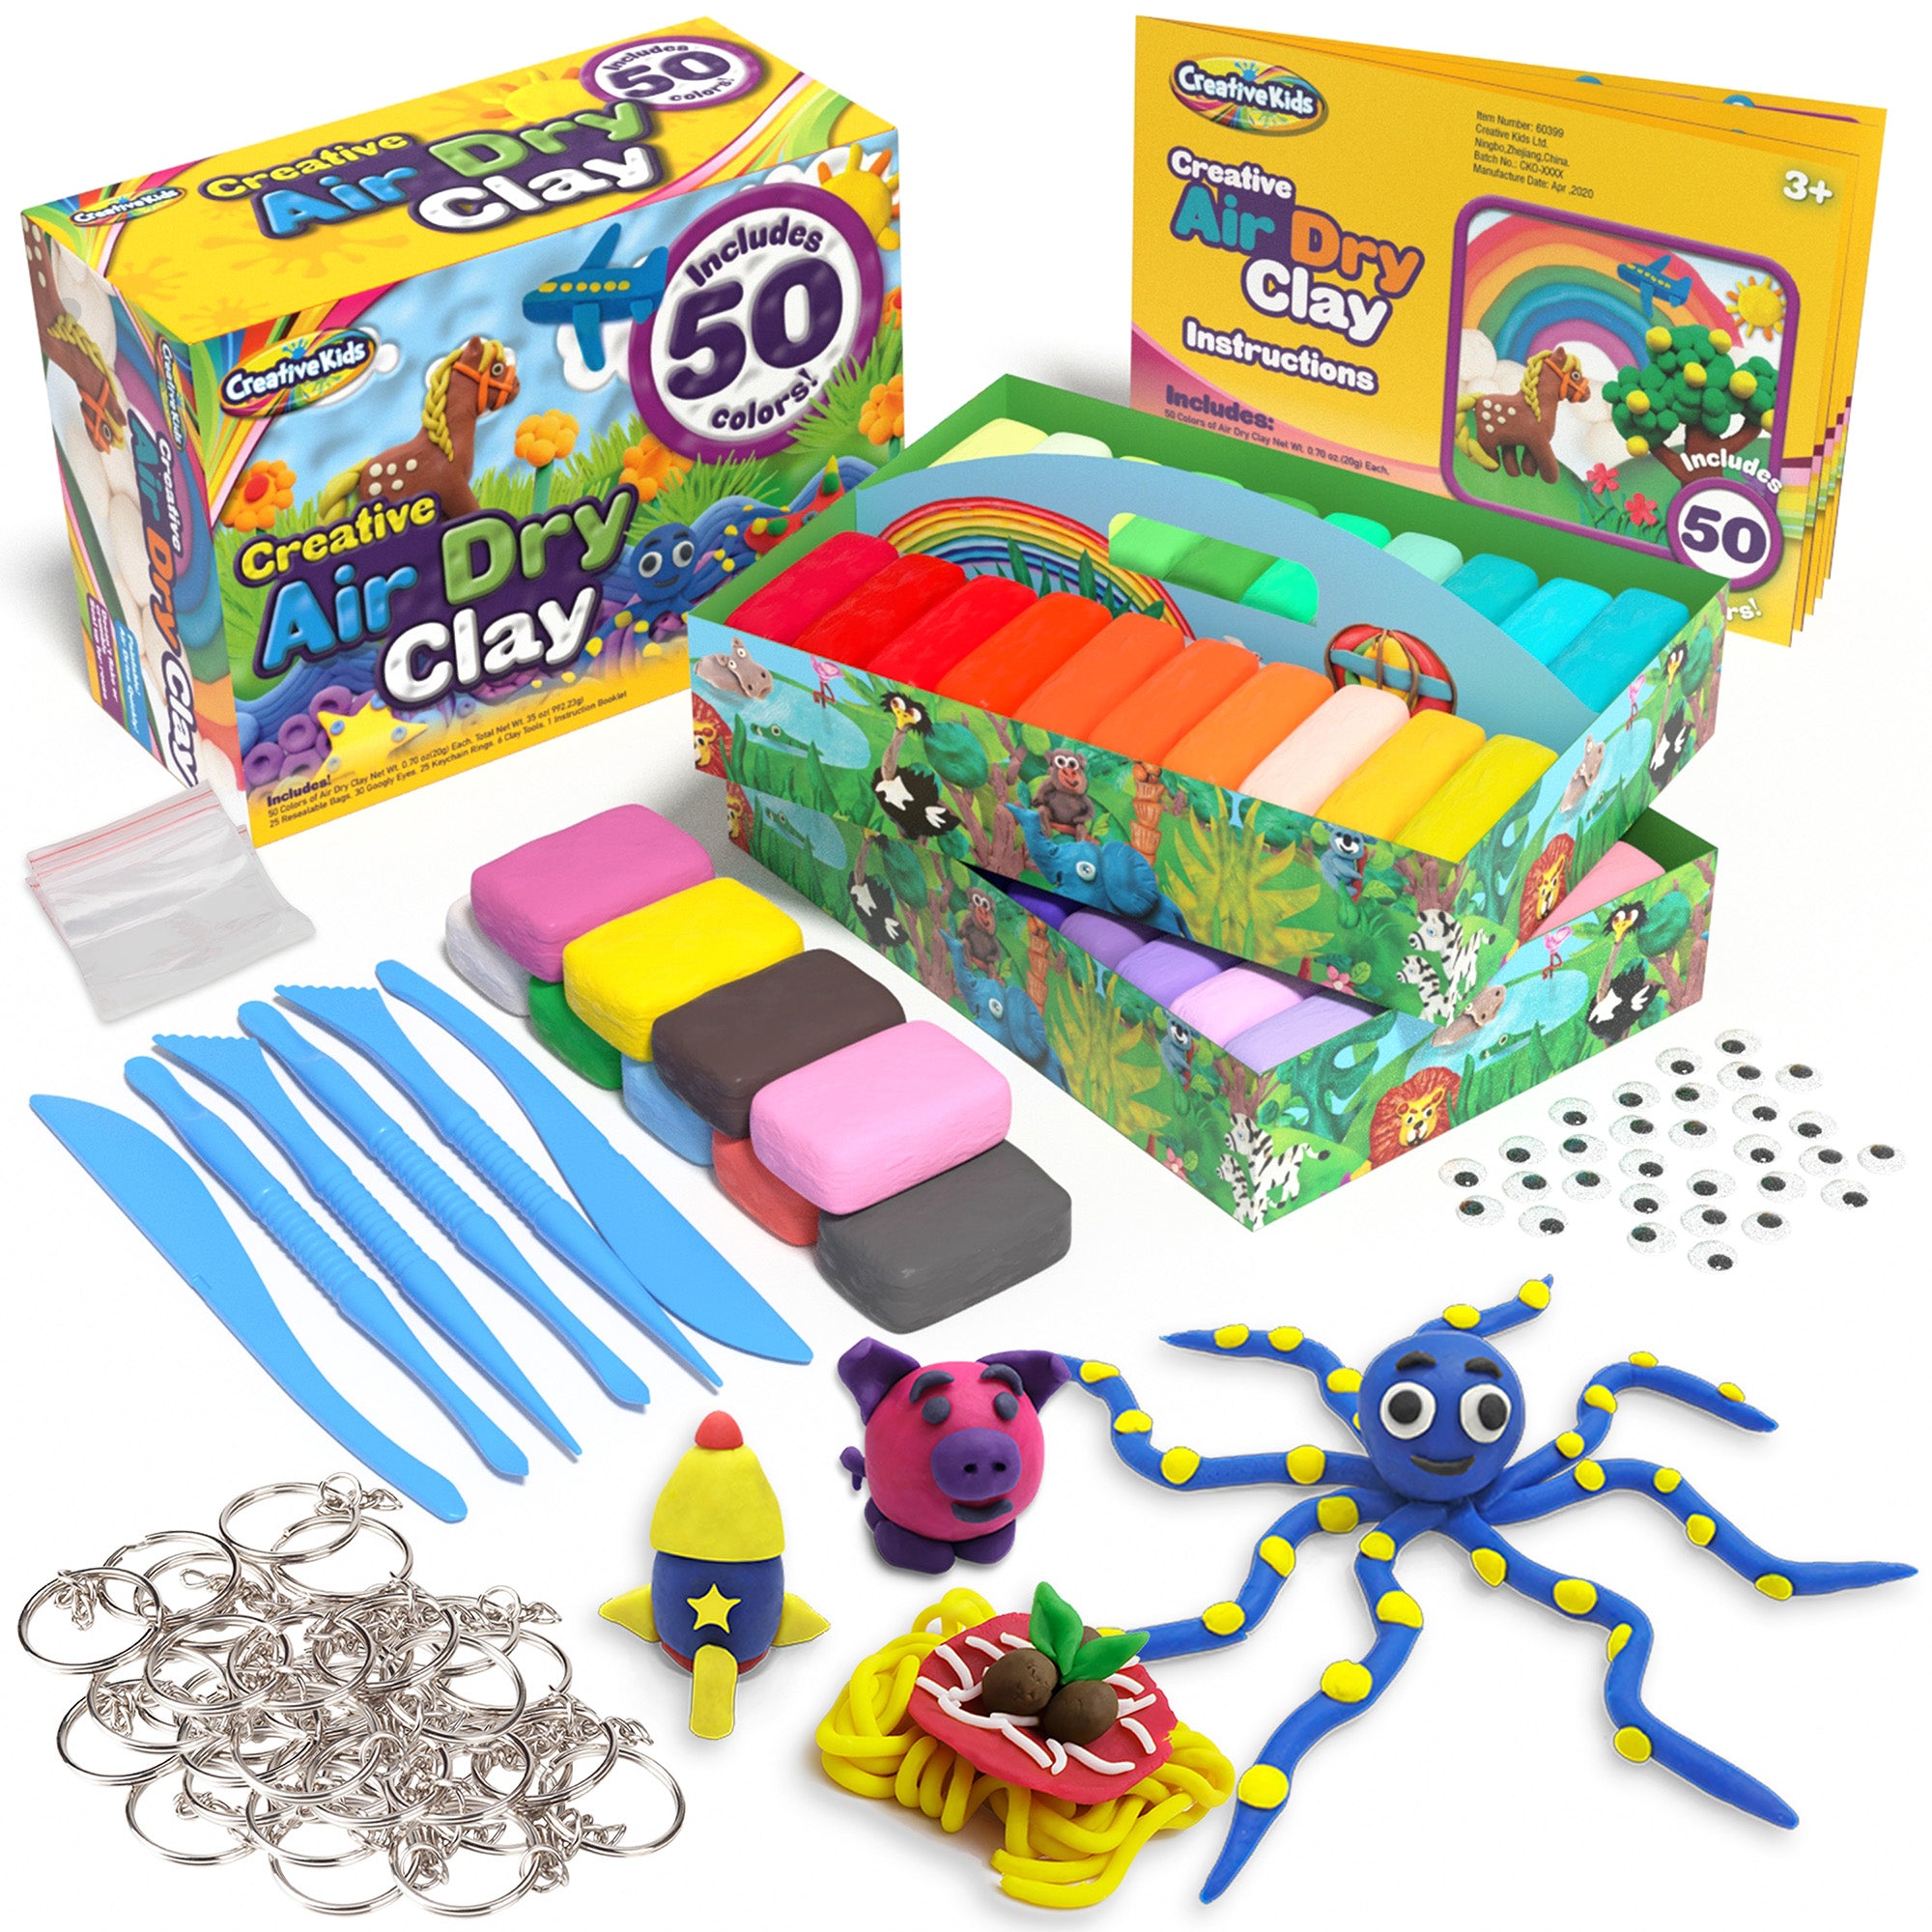 The Spaceship Modeling Clay Craft Kits | 12 Color Premium Soft Air Dry Clay